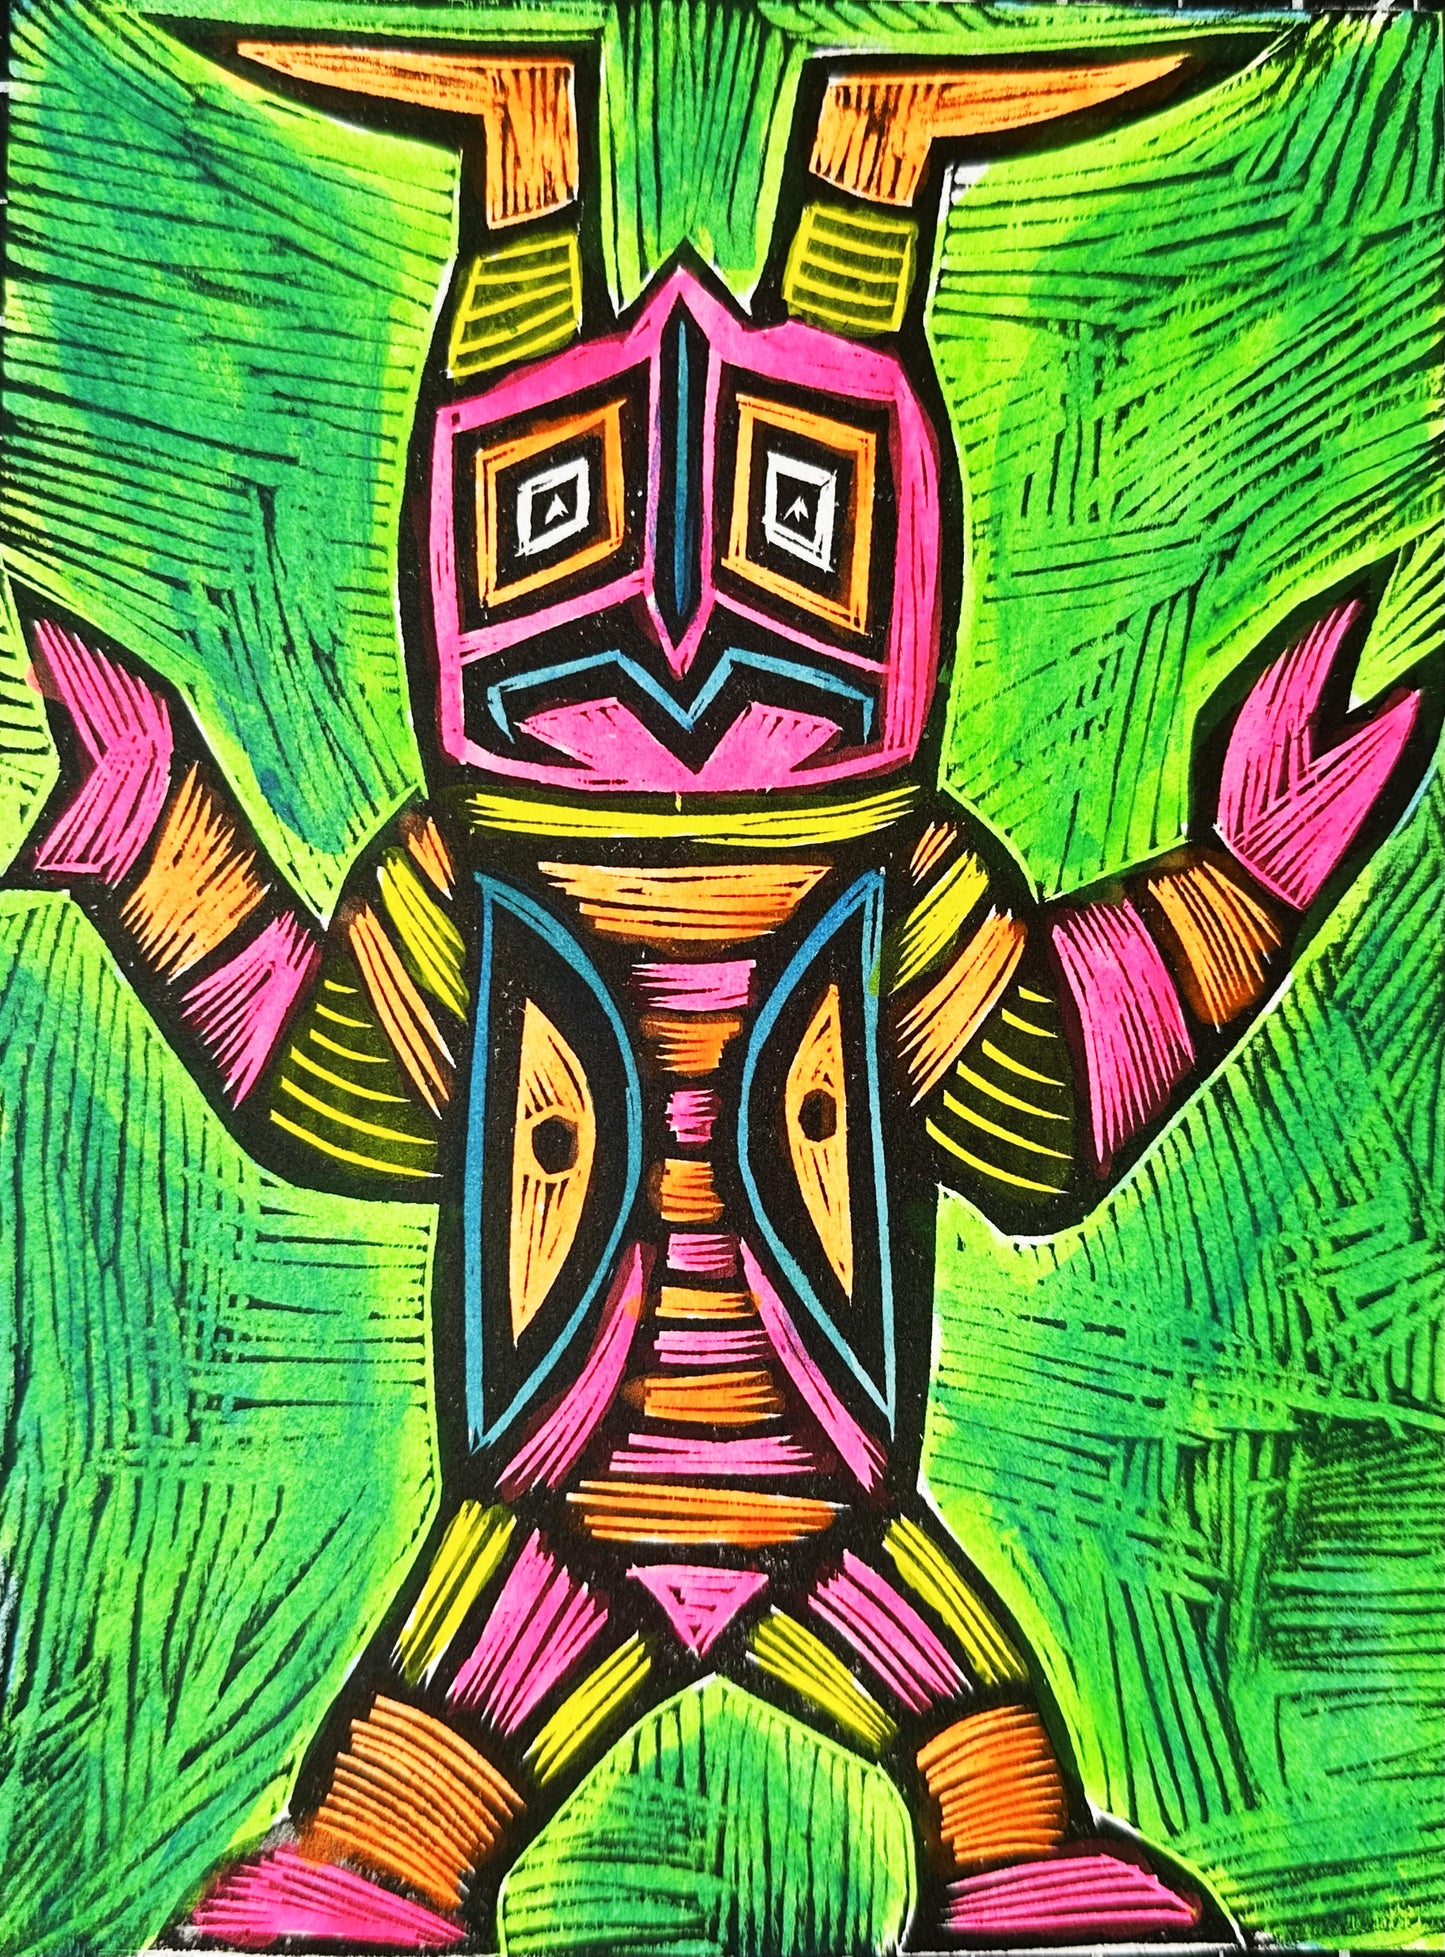 Pink Zetton - Hand Painted Woodcut